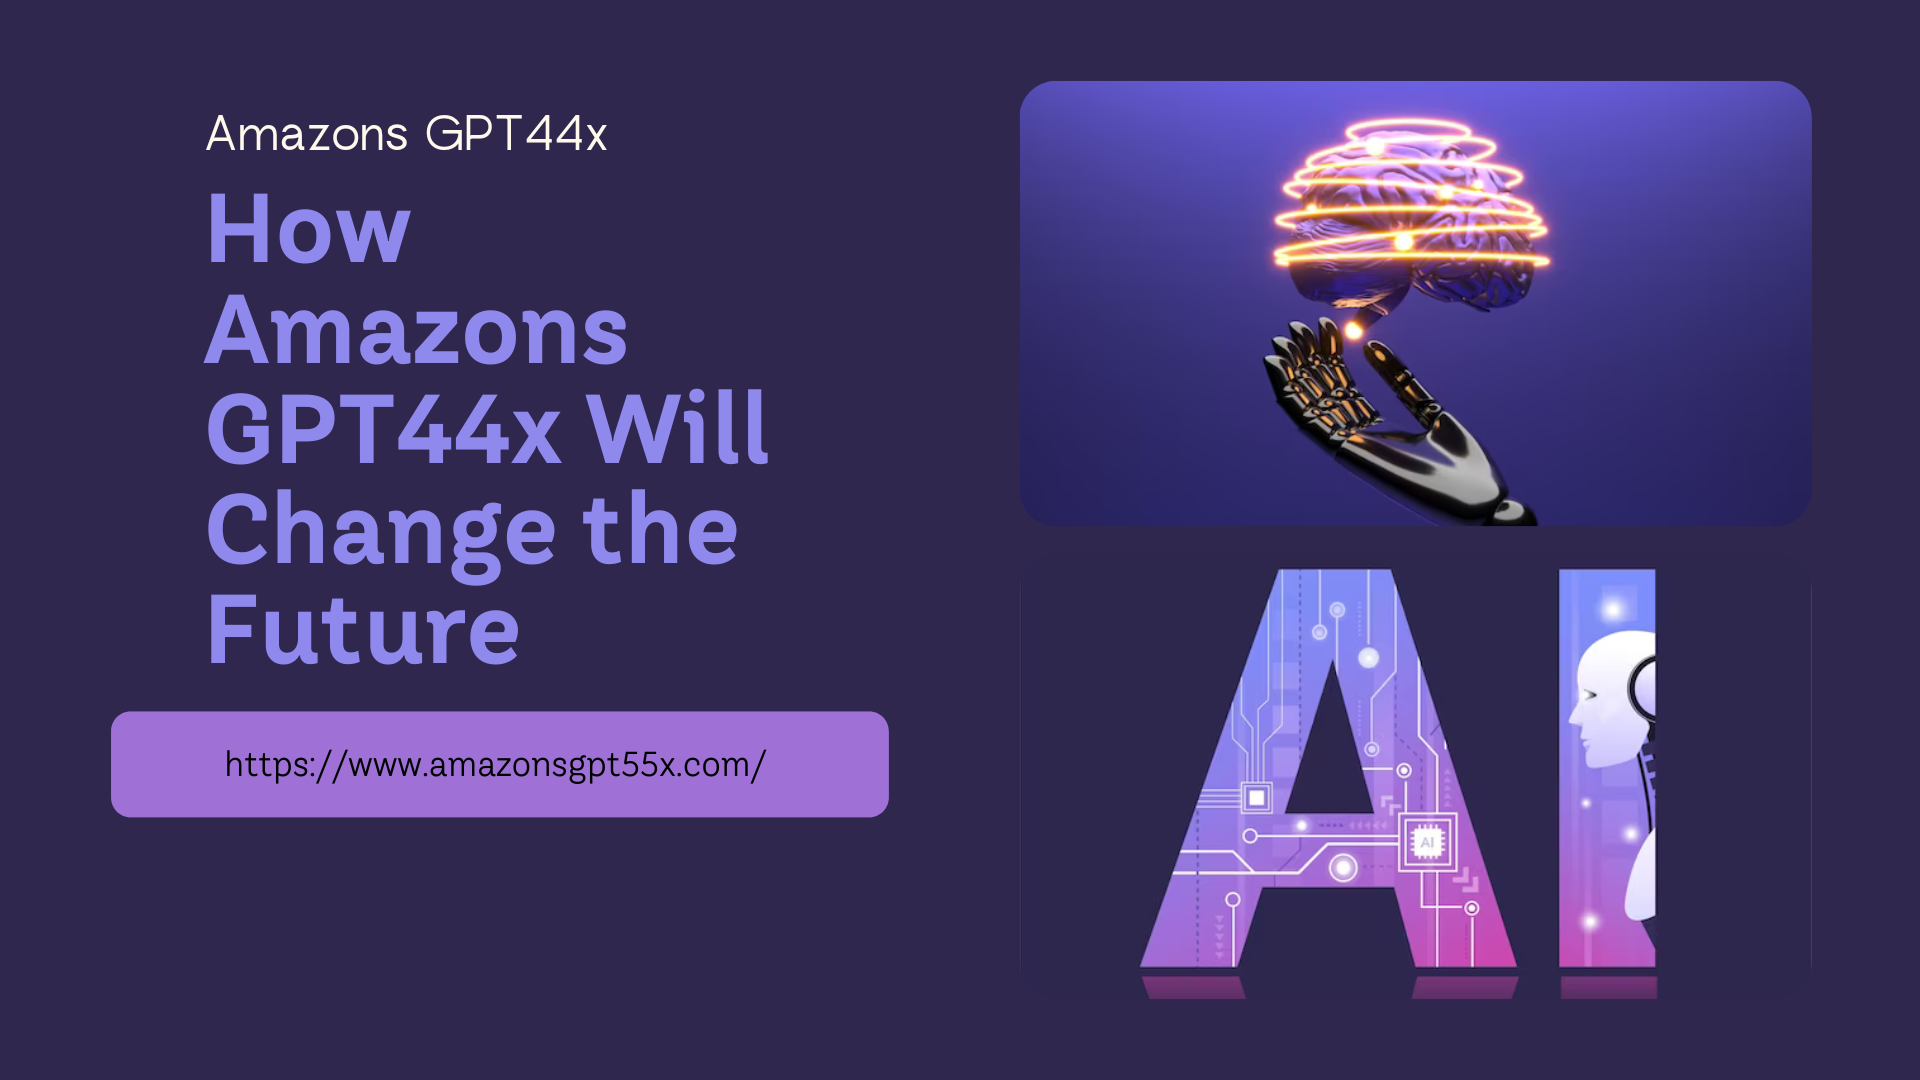 How Amazons GPT44x Will Change the Future